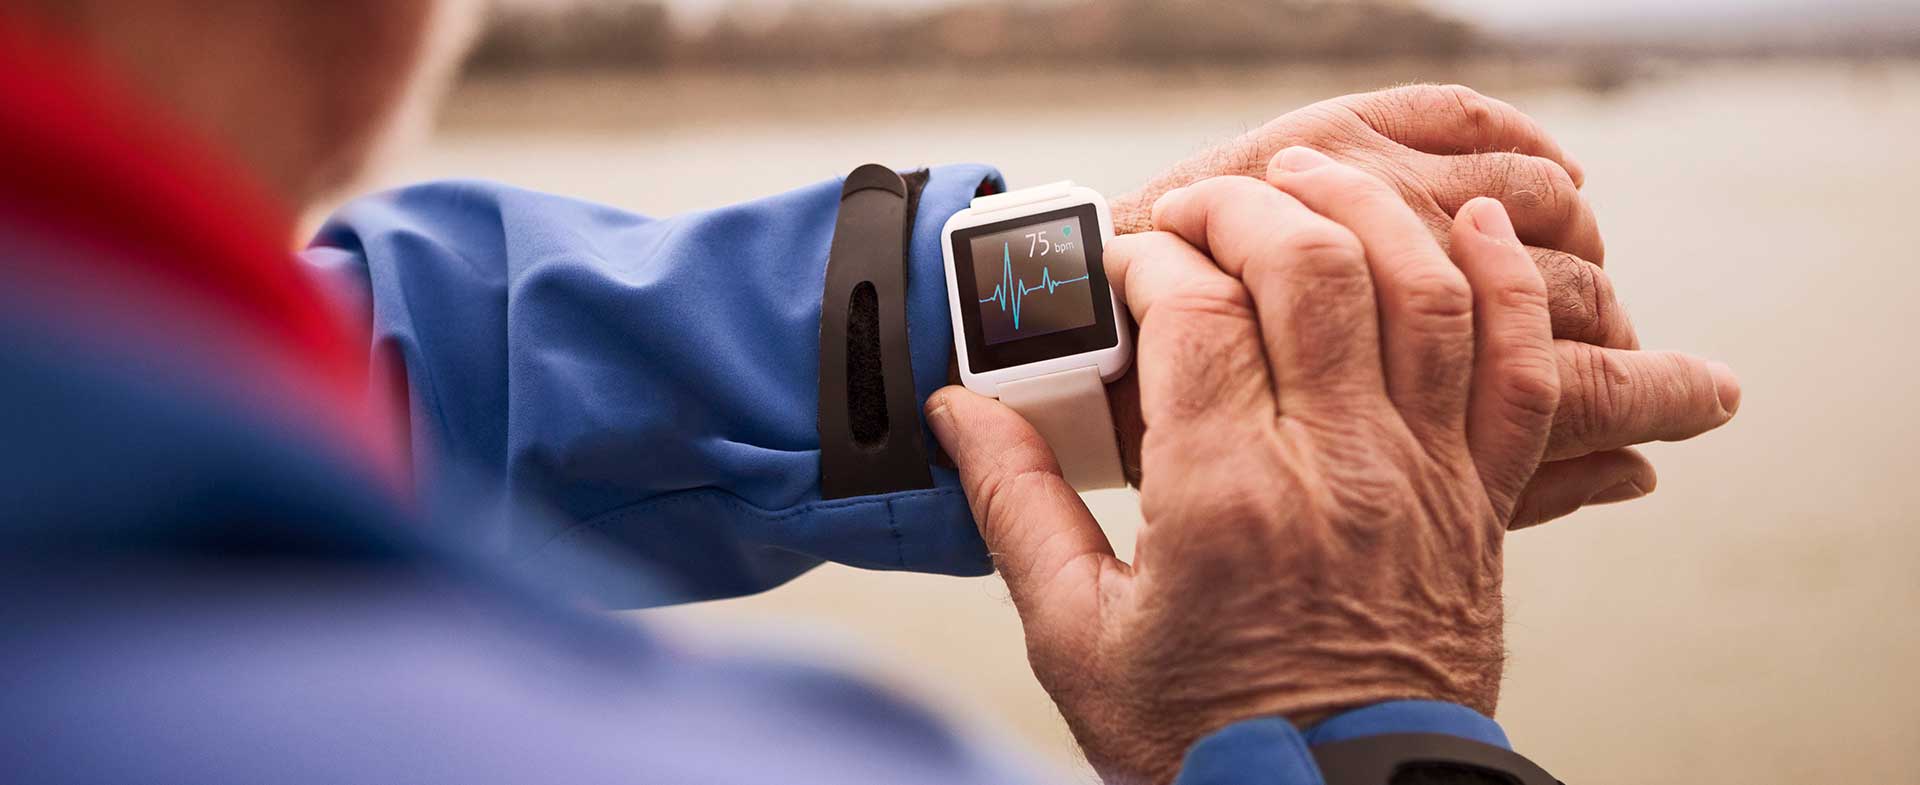 can a smart watch help diagnose AFib